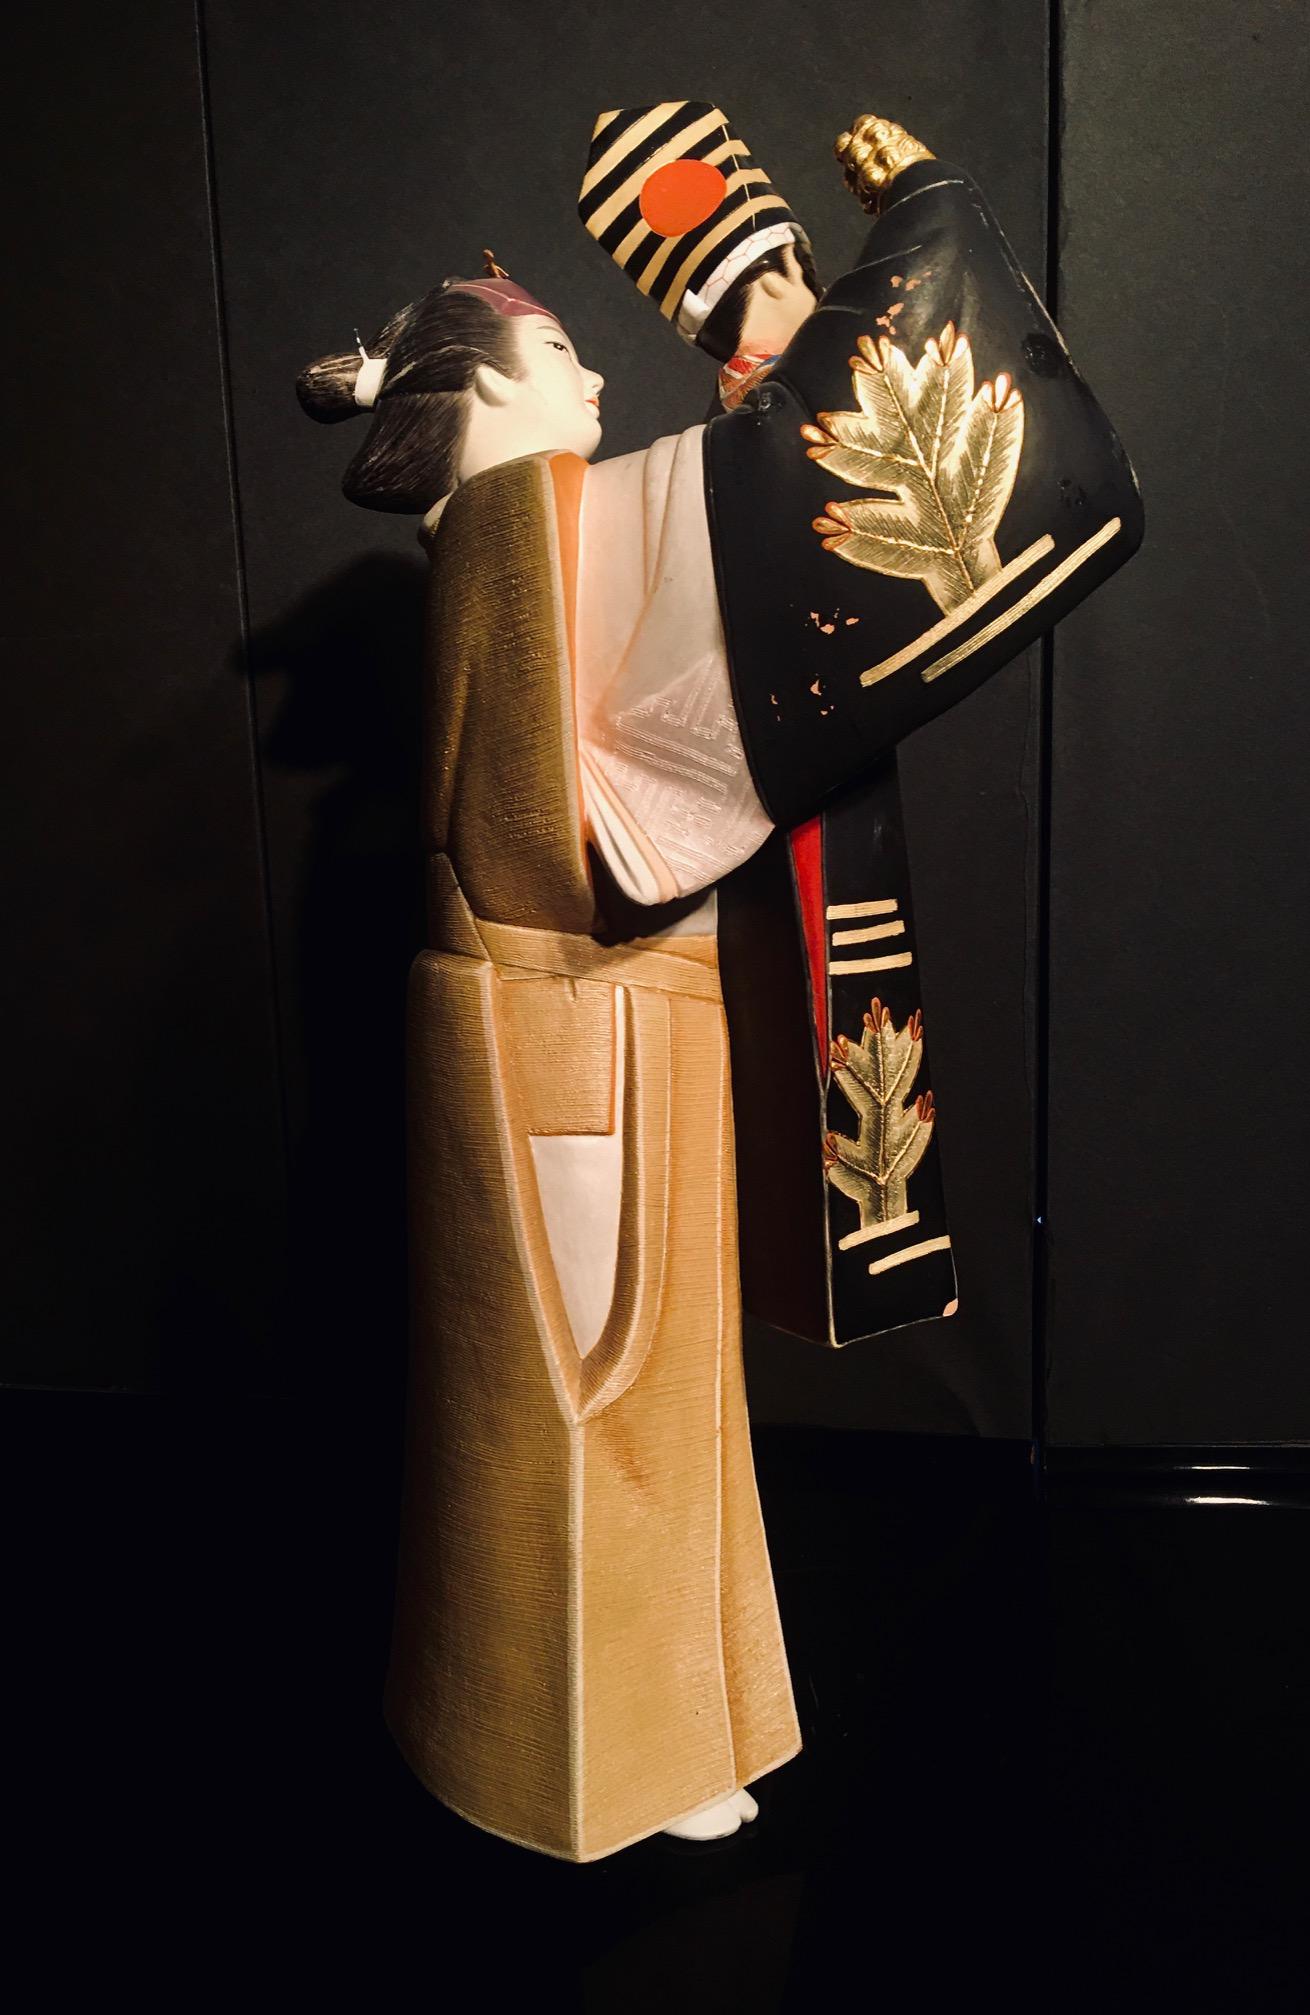 Japanese Showa Hakata Ceramic Doll of a Male Puppeteer 3